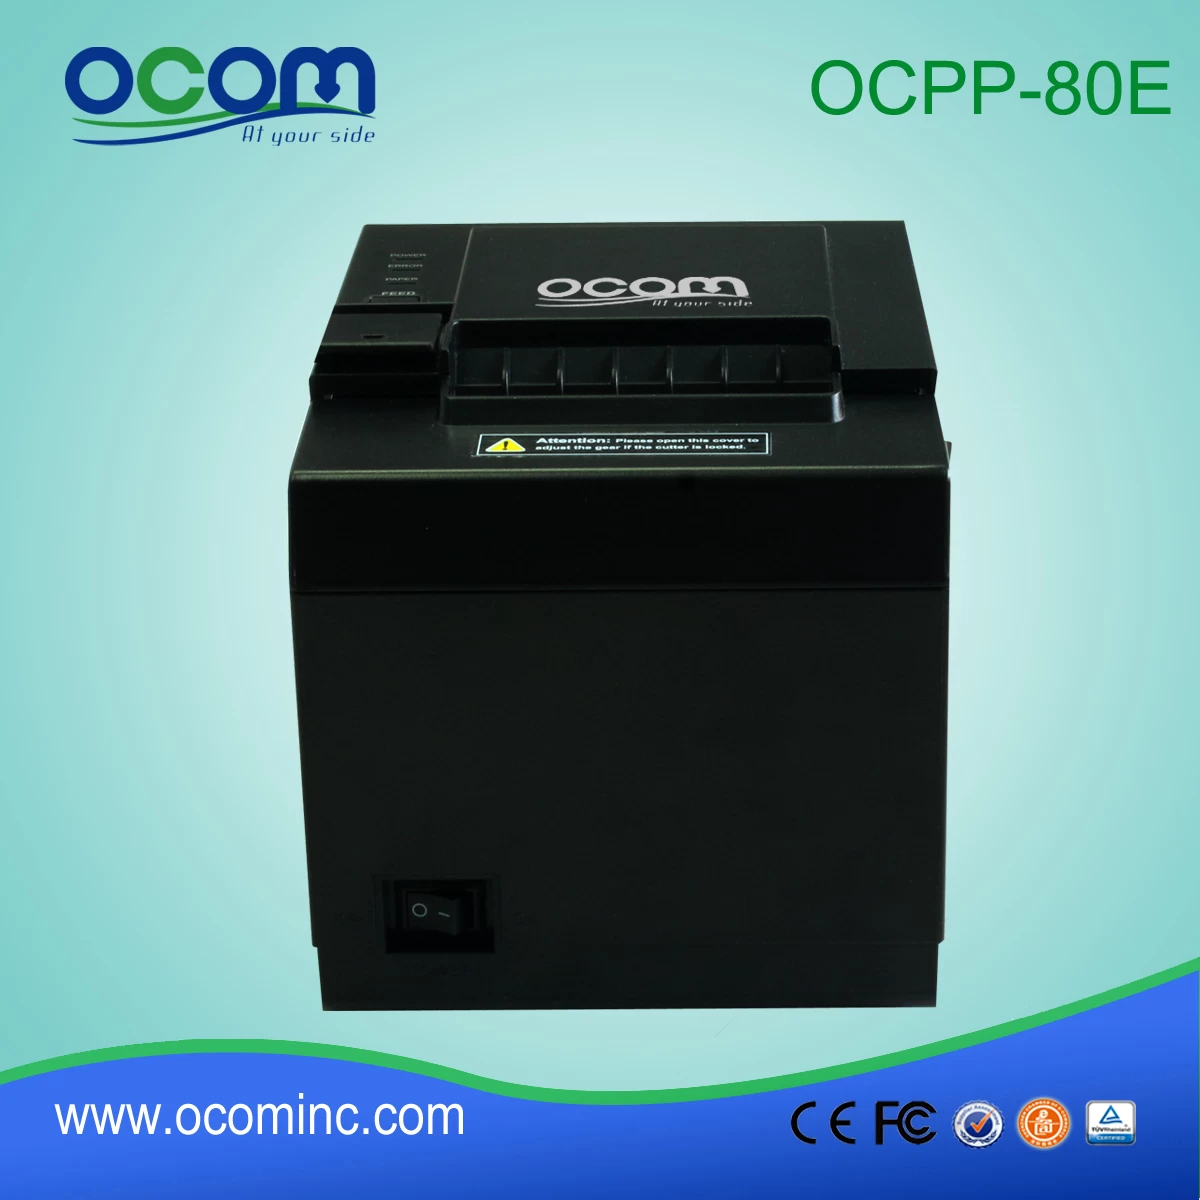 80mm Win8 Thermal Printer RS232, USB, Lan 3 Interfaces Together (OCPP-80E)